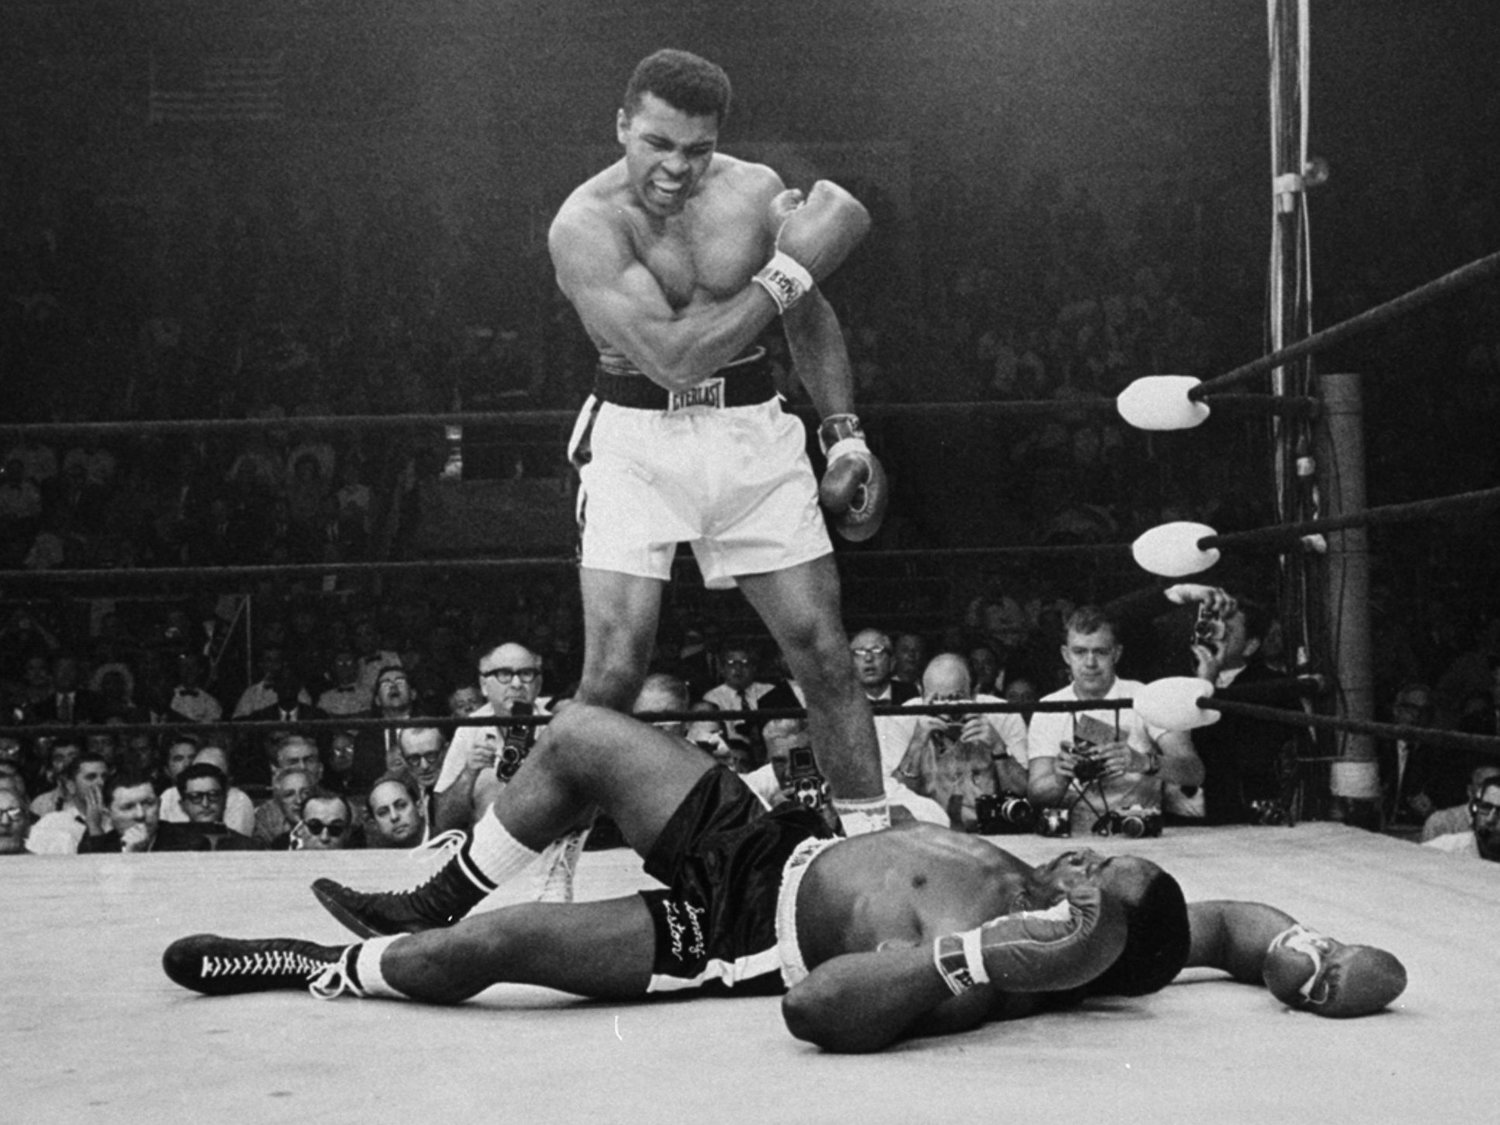 Muhammad Ali towering over a floored Sonny Liston.  Speculation remains rife that Liston took a dive on a "phantom punch".